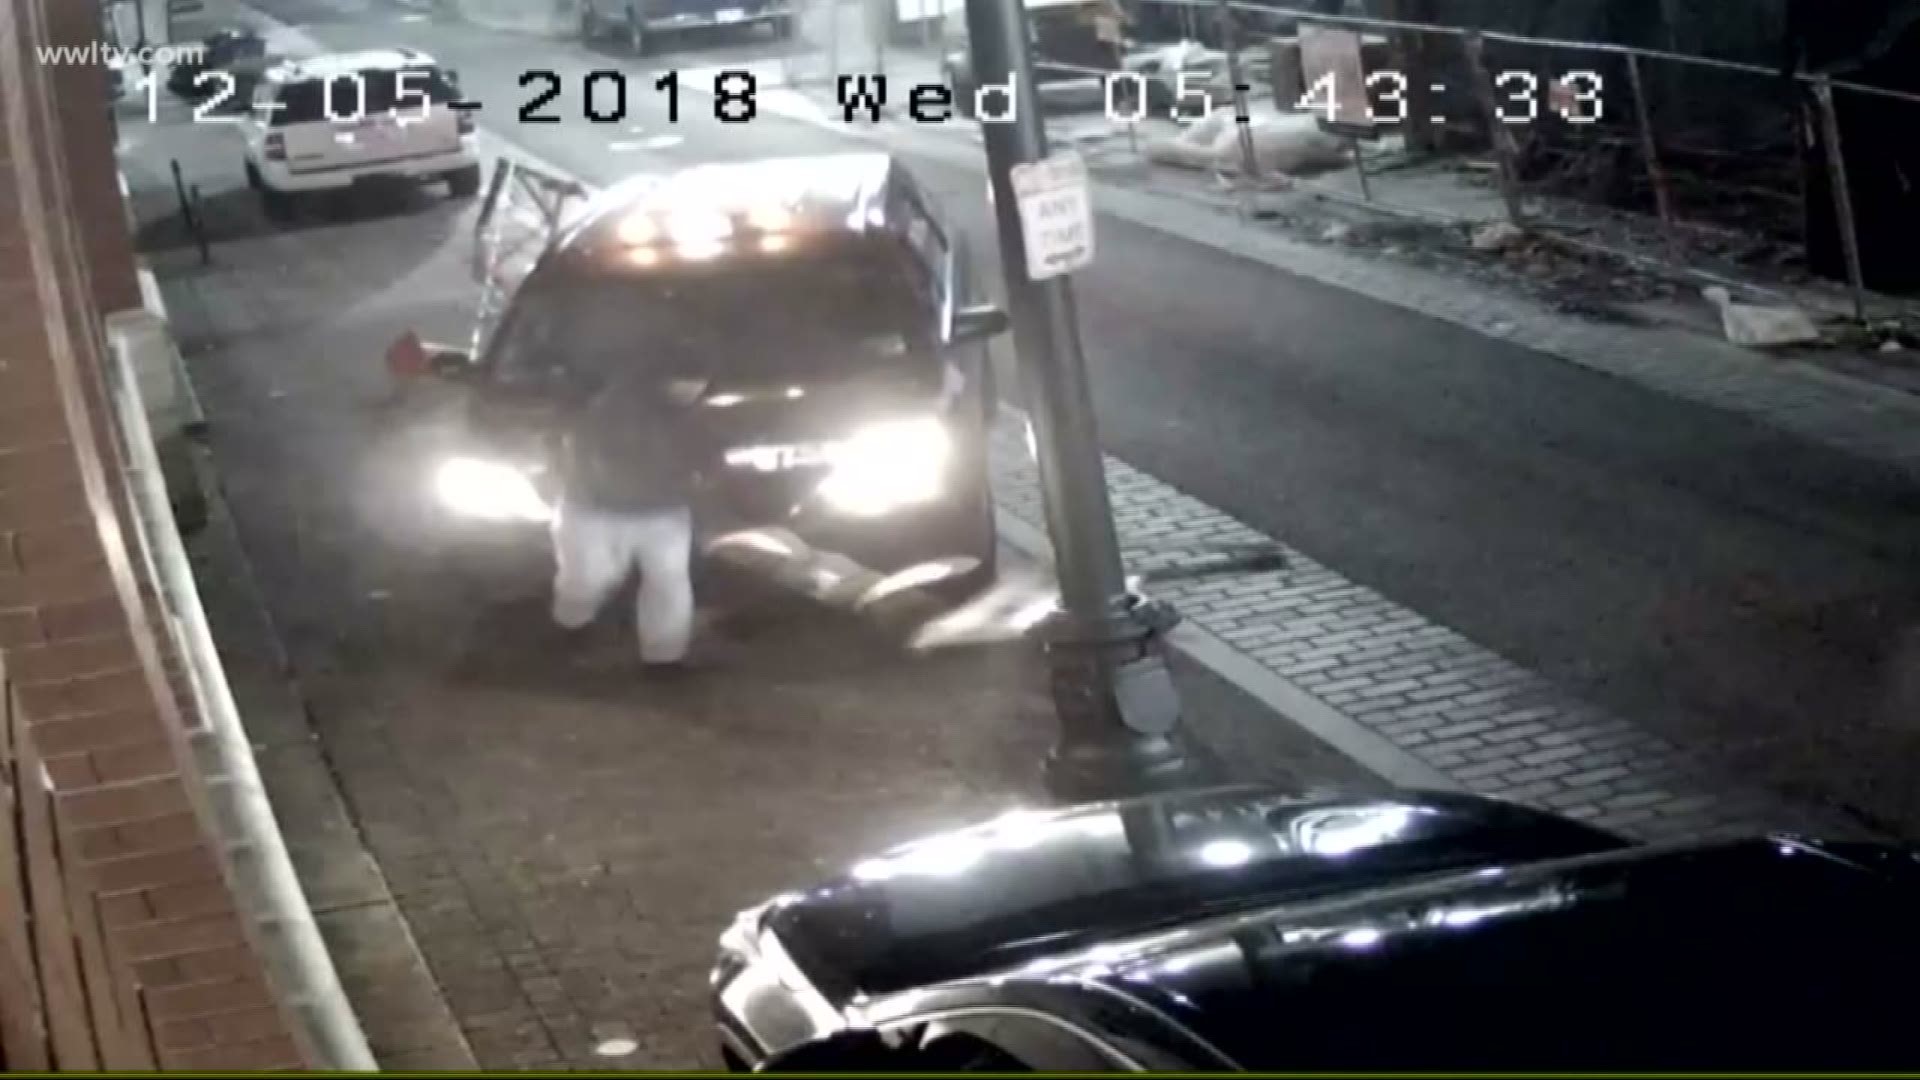 Surveillance video appears to show a cab drive onto the sidewalk and into an alleged cell phone thief.